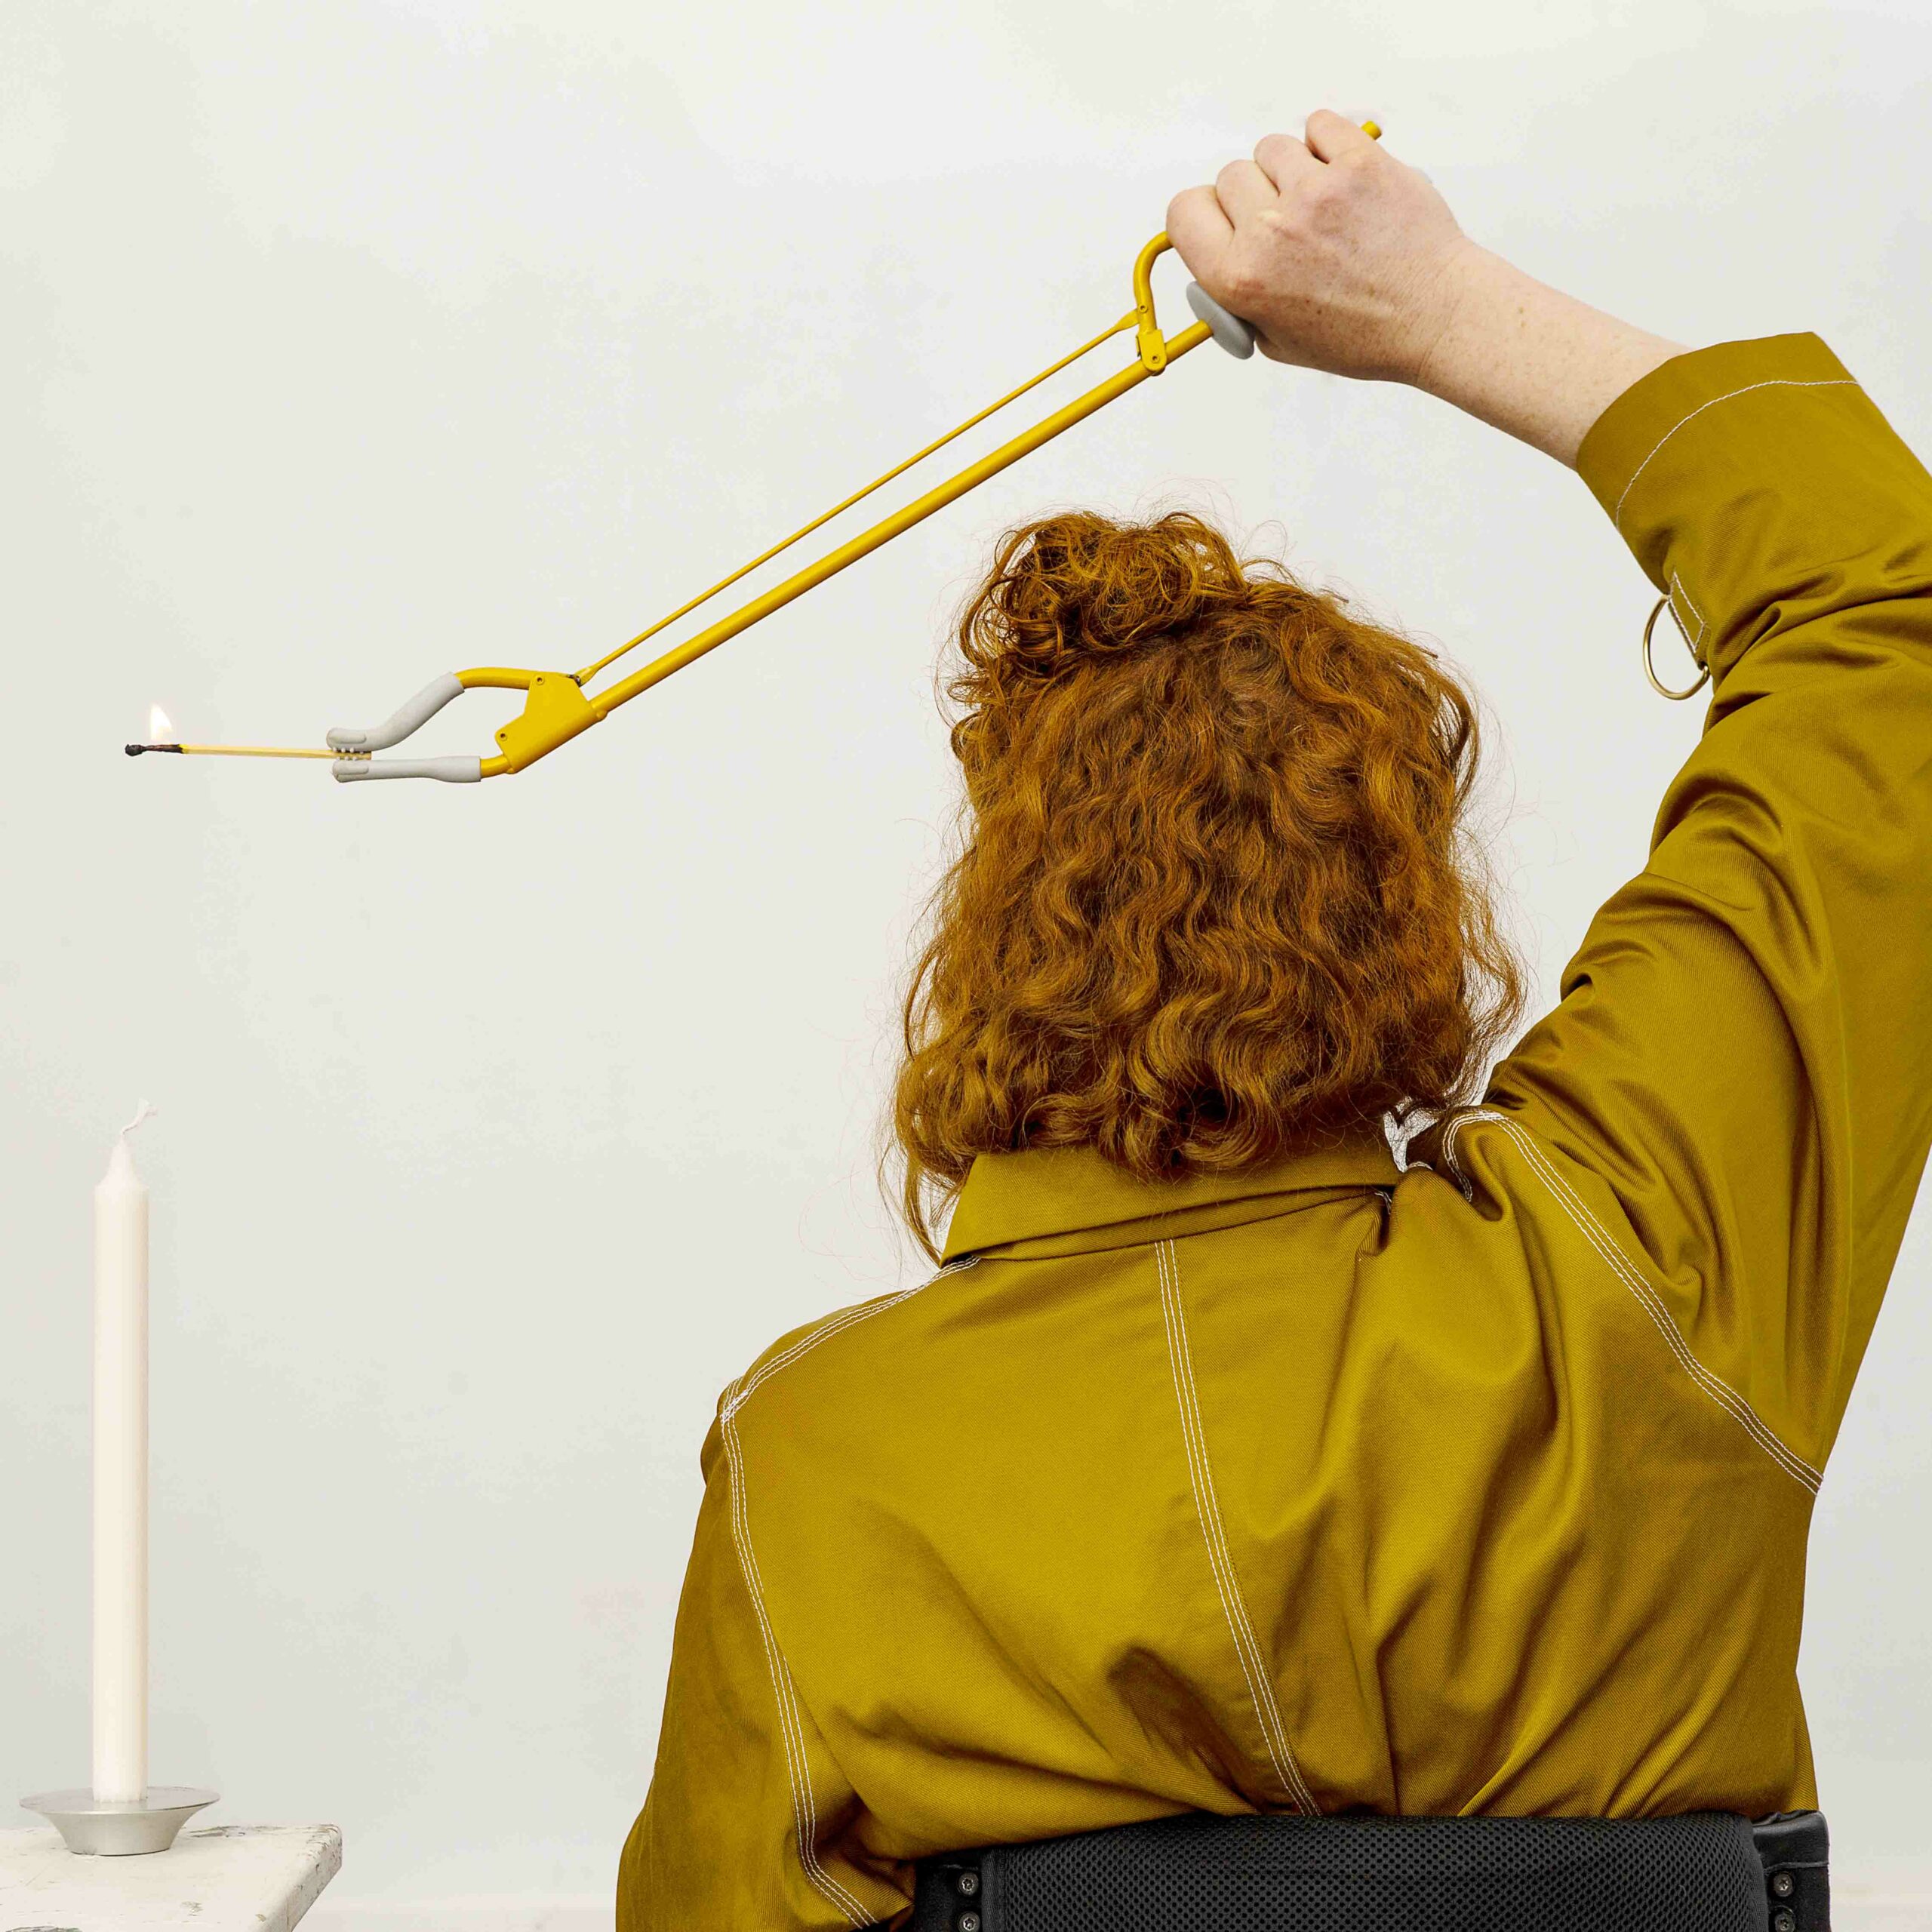 The image depicts a person with red hair sitting with the back towards us, wearing a mustard-yellow shirt. In their hand is a yellow gripper holding a lit match above a stearic candle. Photo: Lars Dyrendom